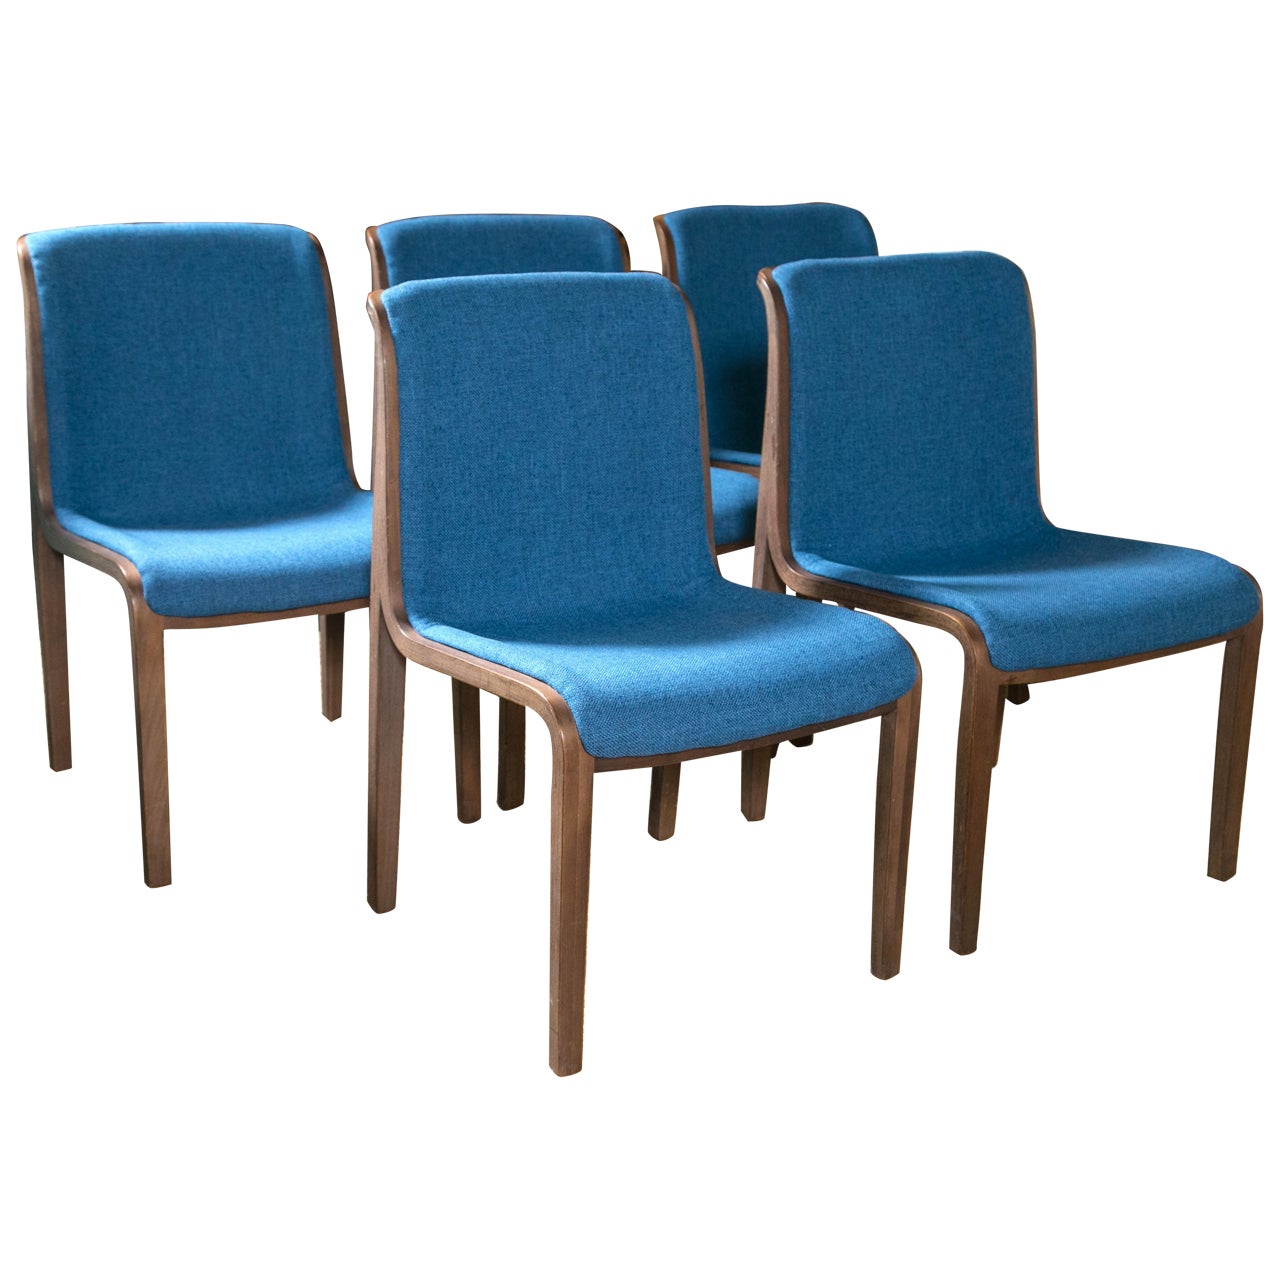 Set of Ten Knoll Chairs Designed by Bill Stephens